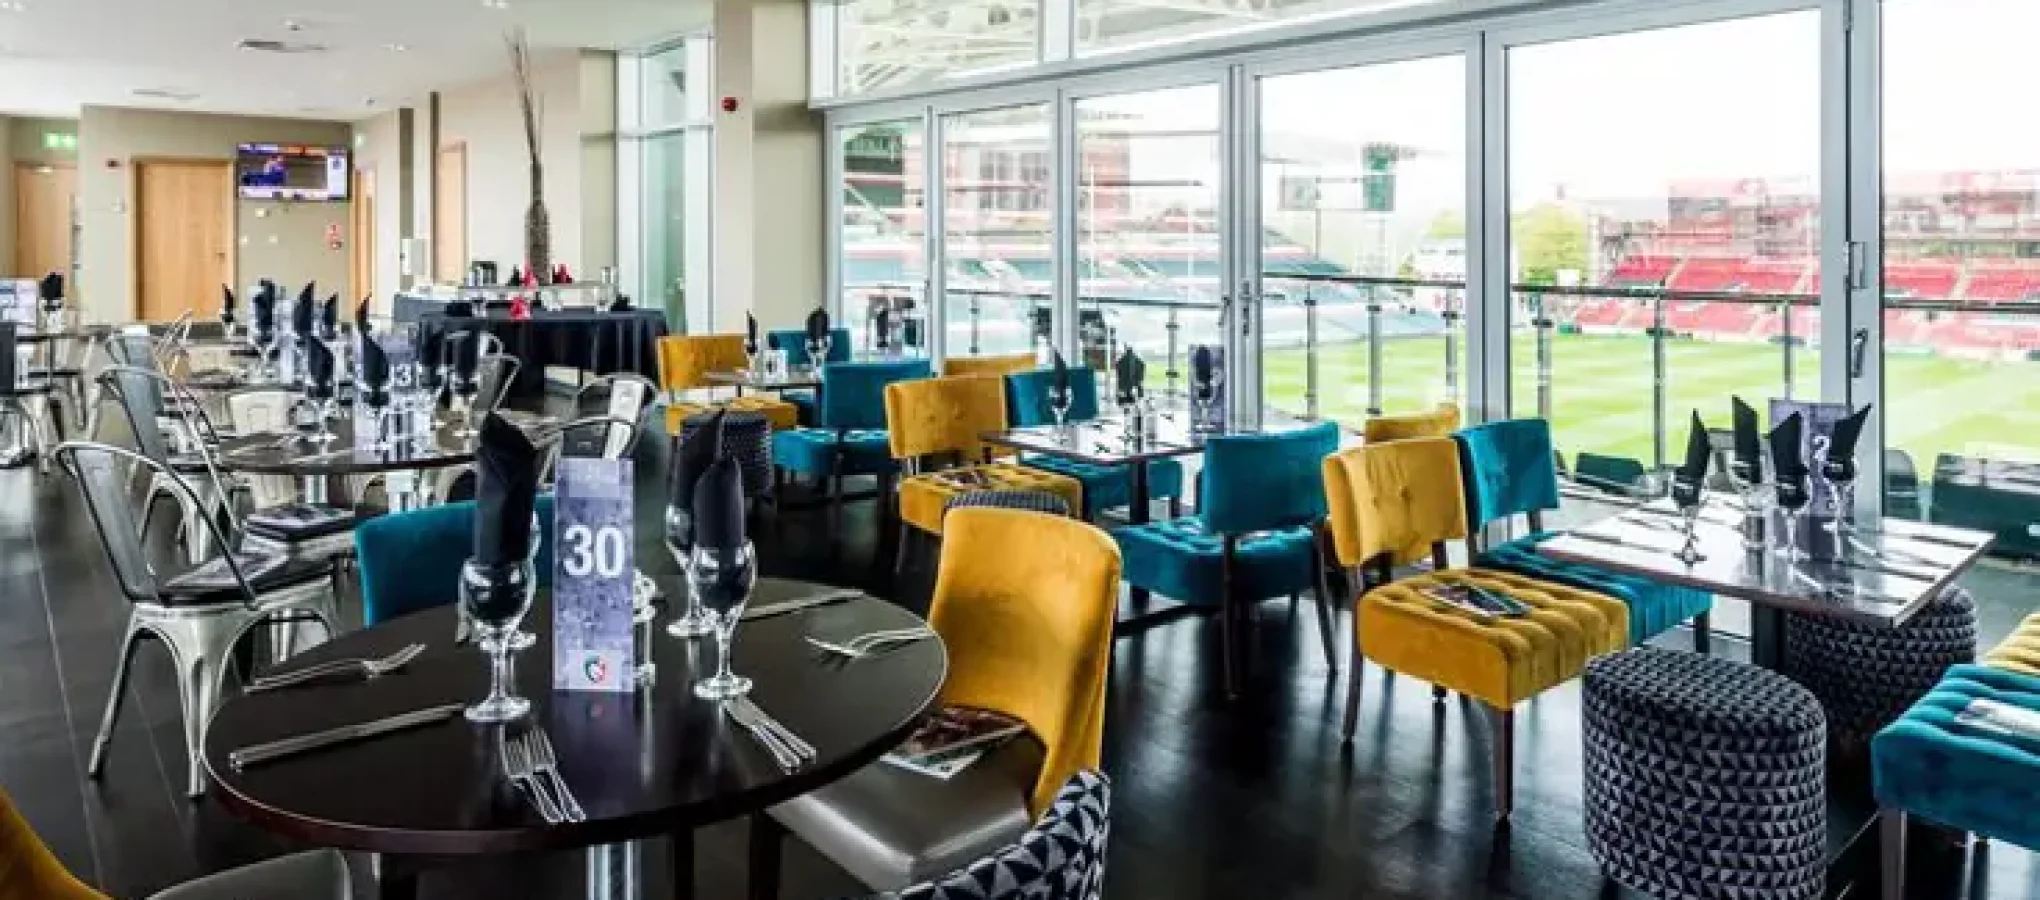 Leicester Meeting Rooms - Leicester Tigers Rugby Club